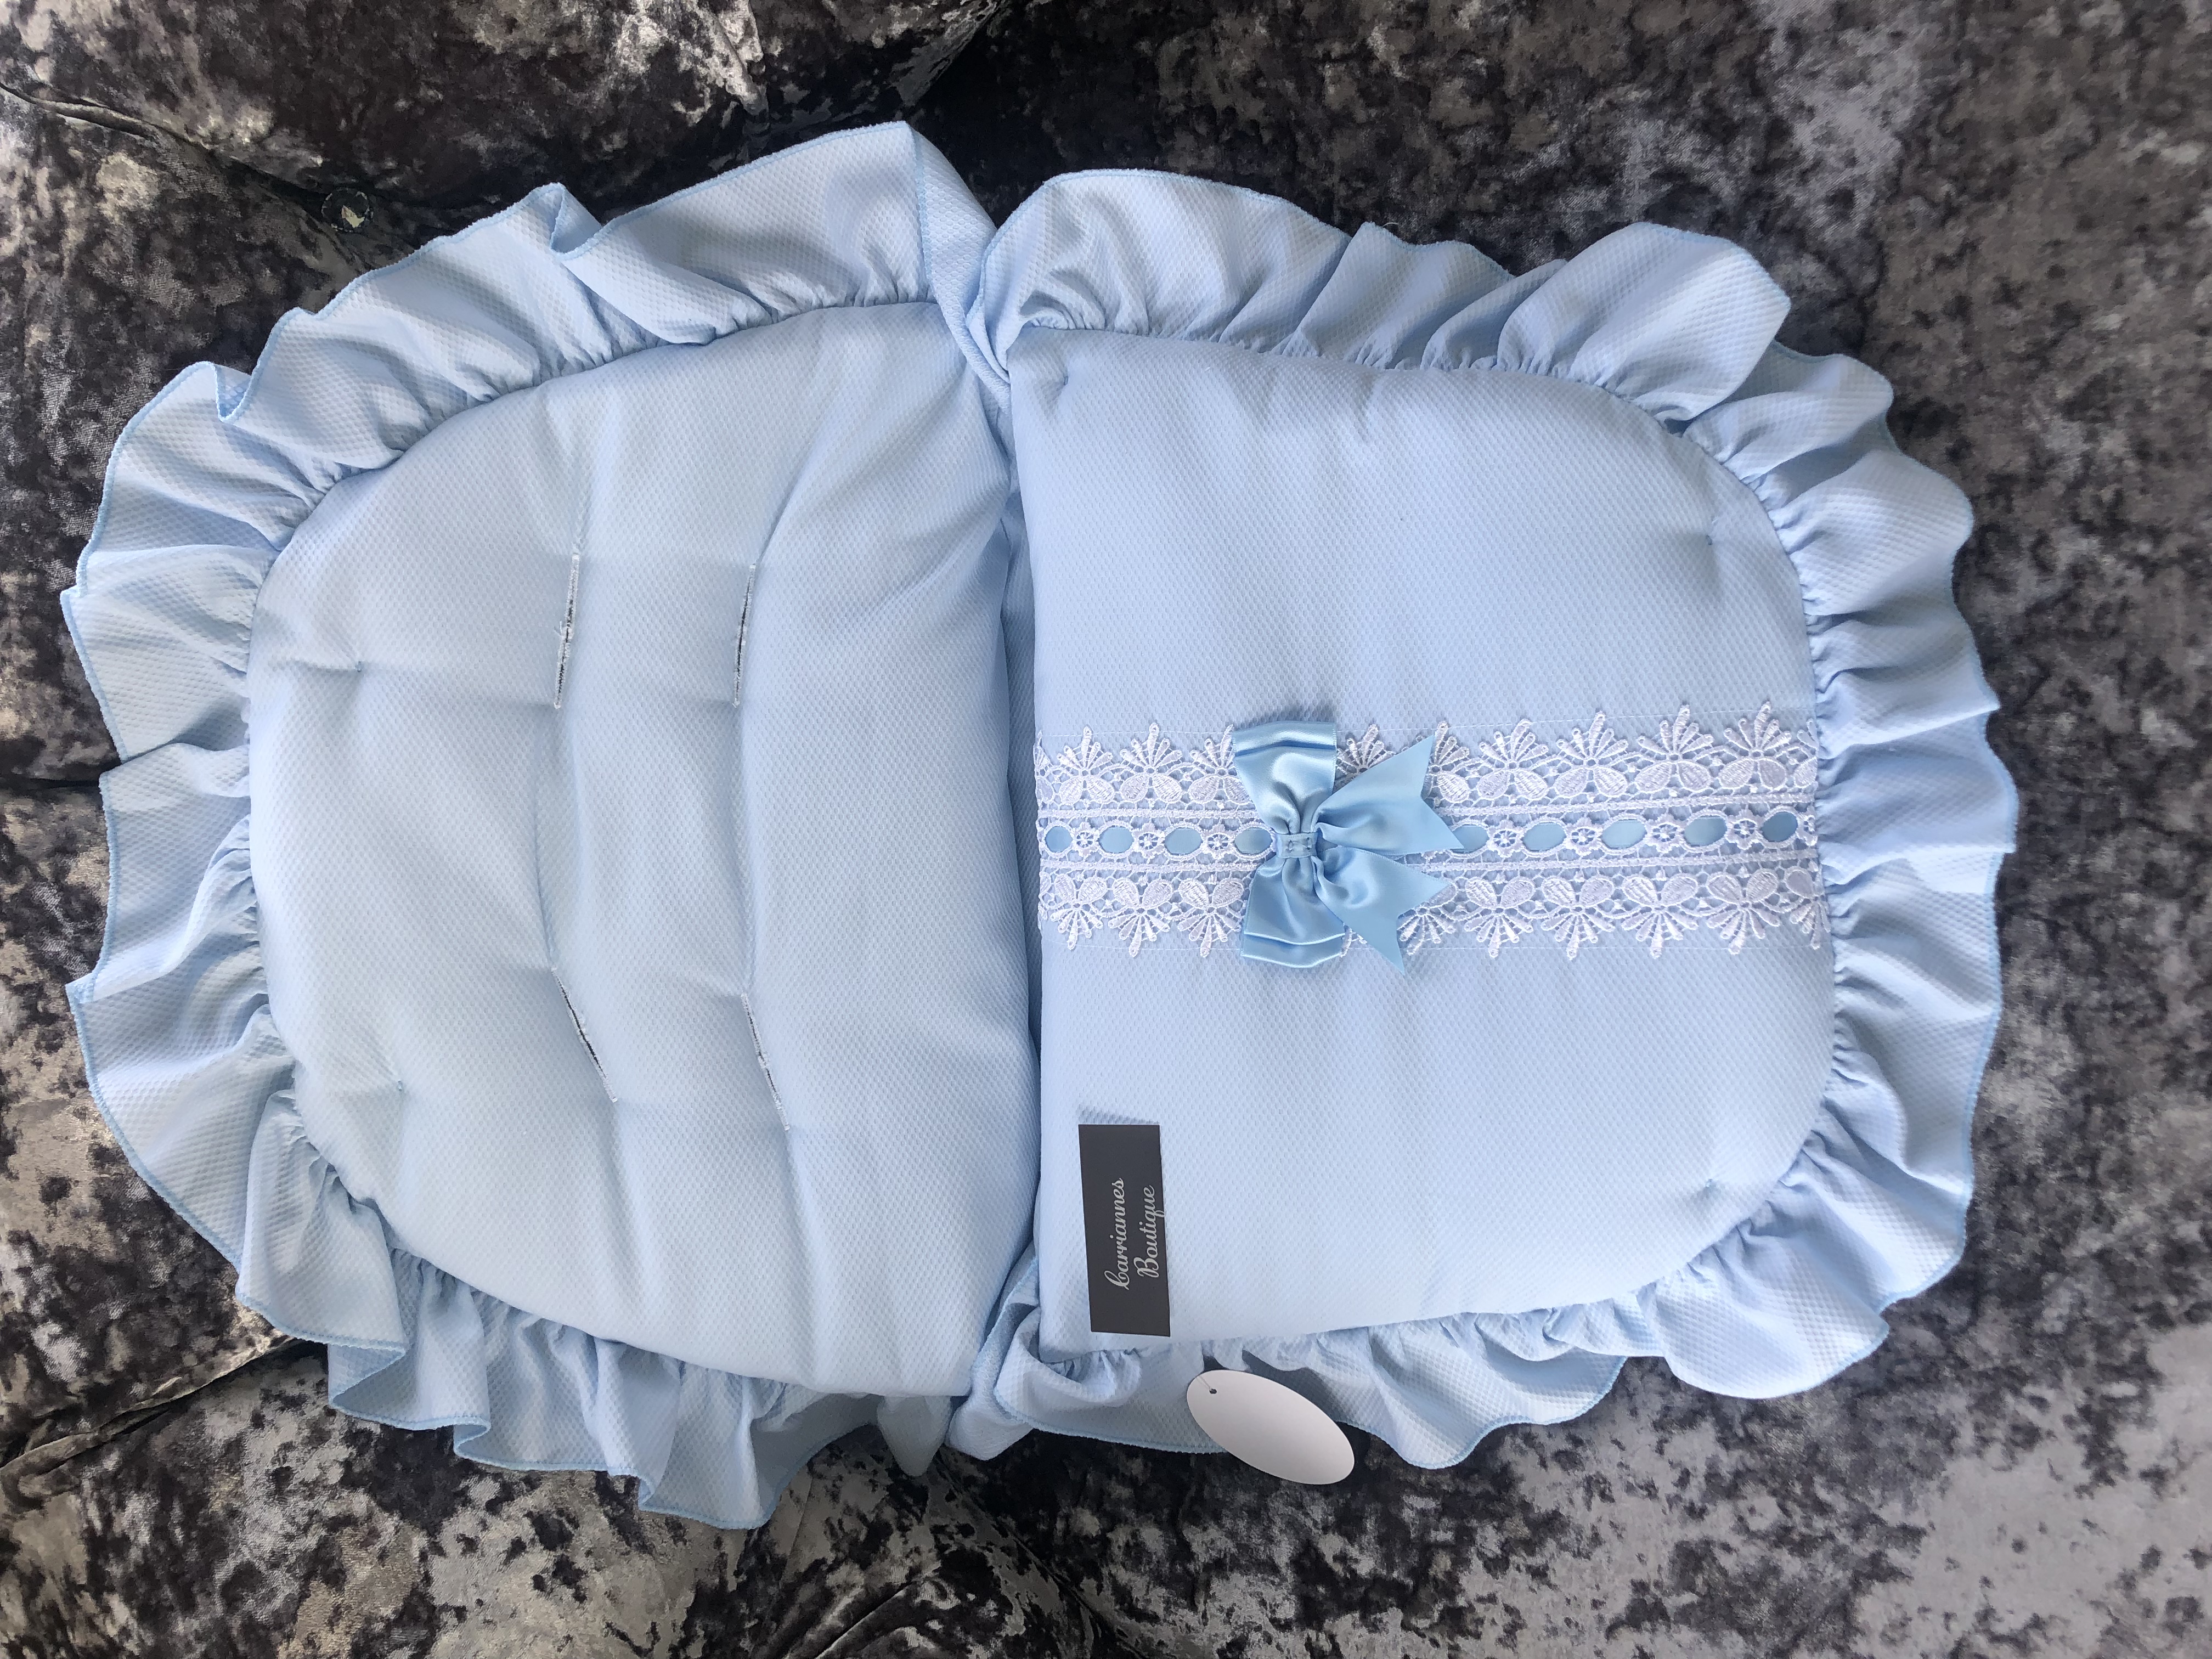 baby car seat cosy toes